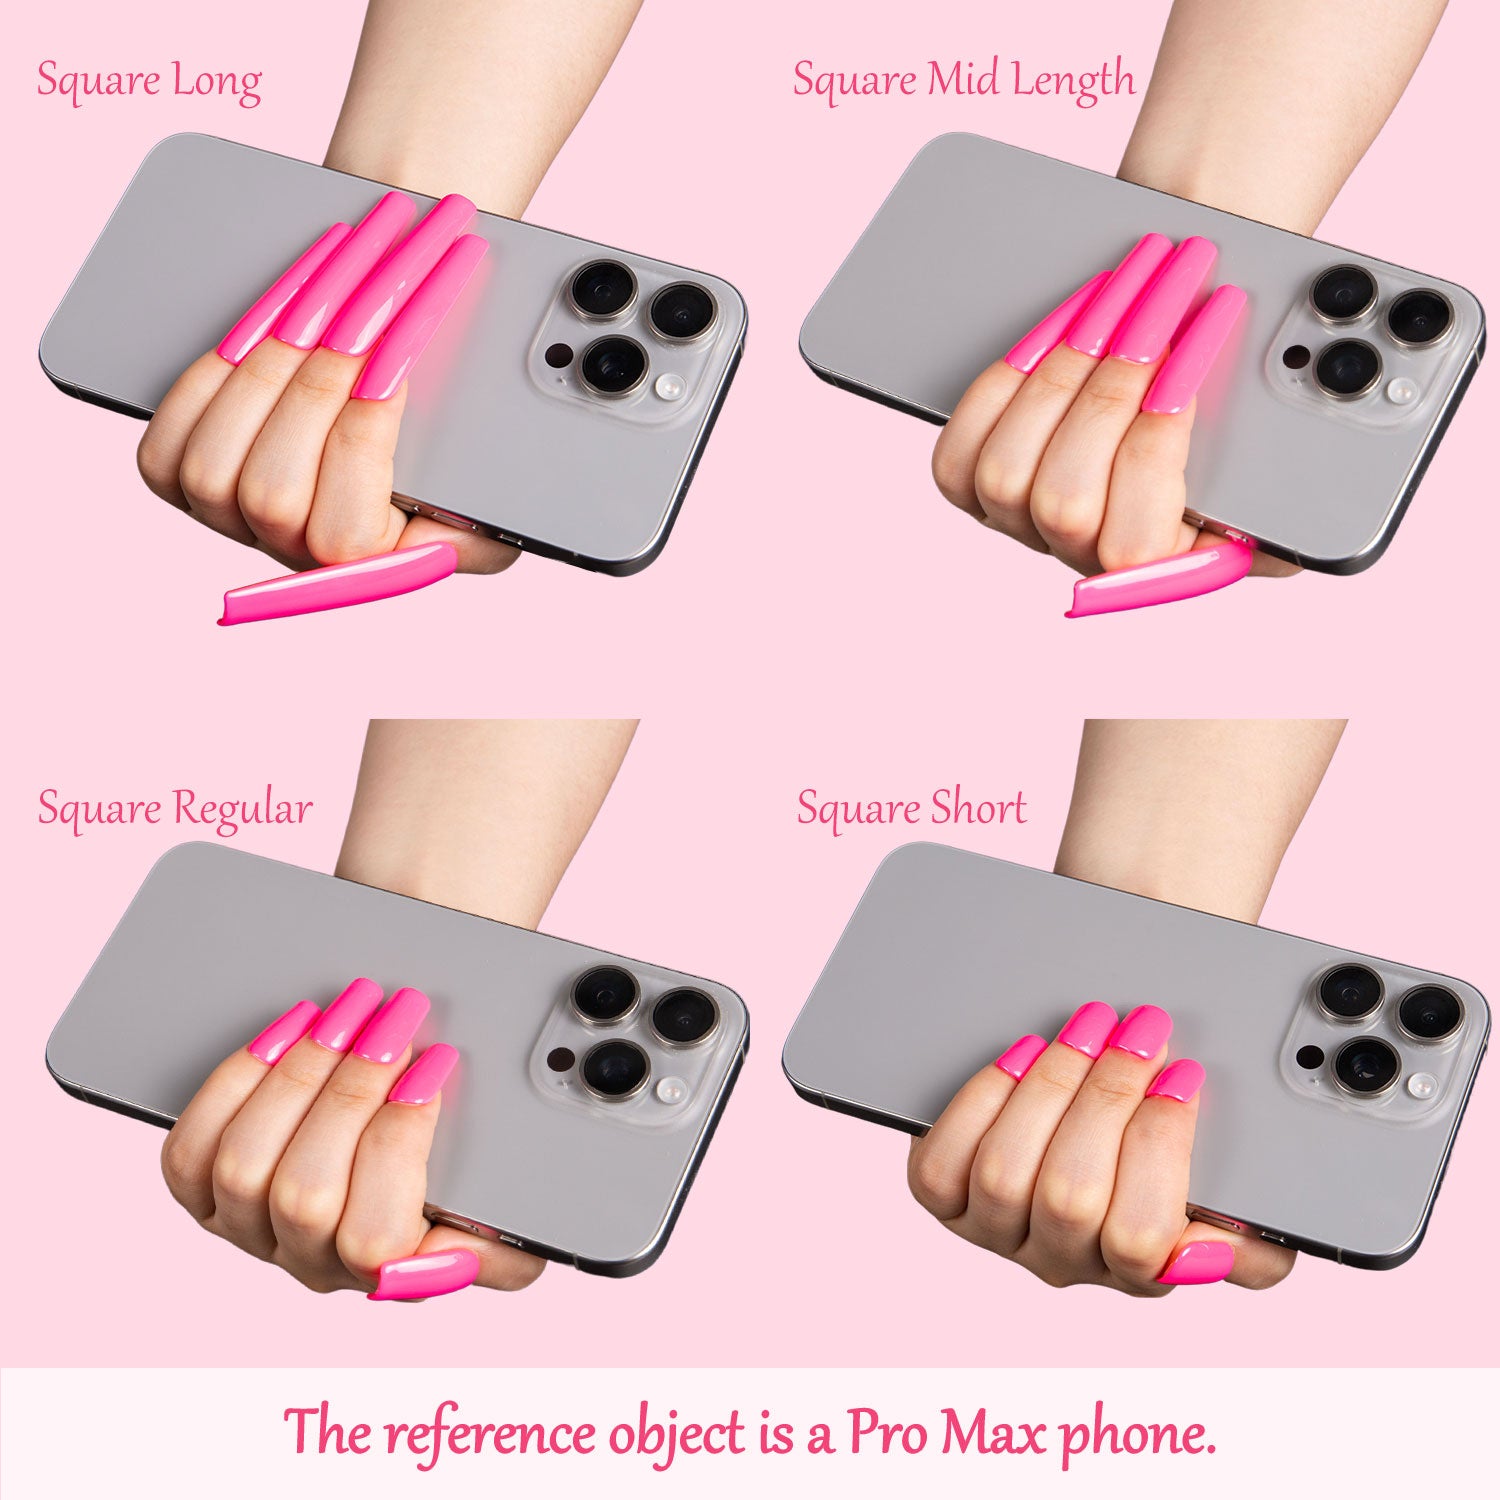 Comparative display of four lengths of pink square press-on nails on hands holding Pro Max phone